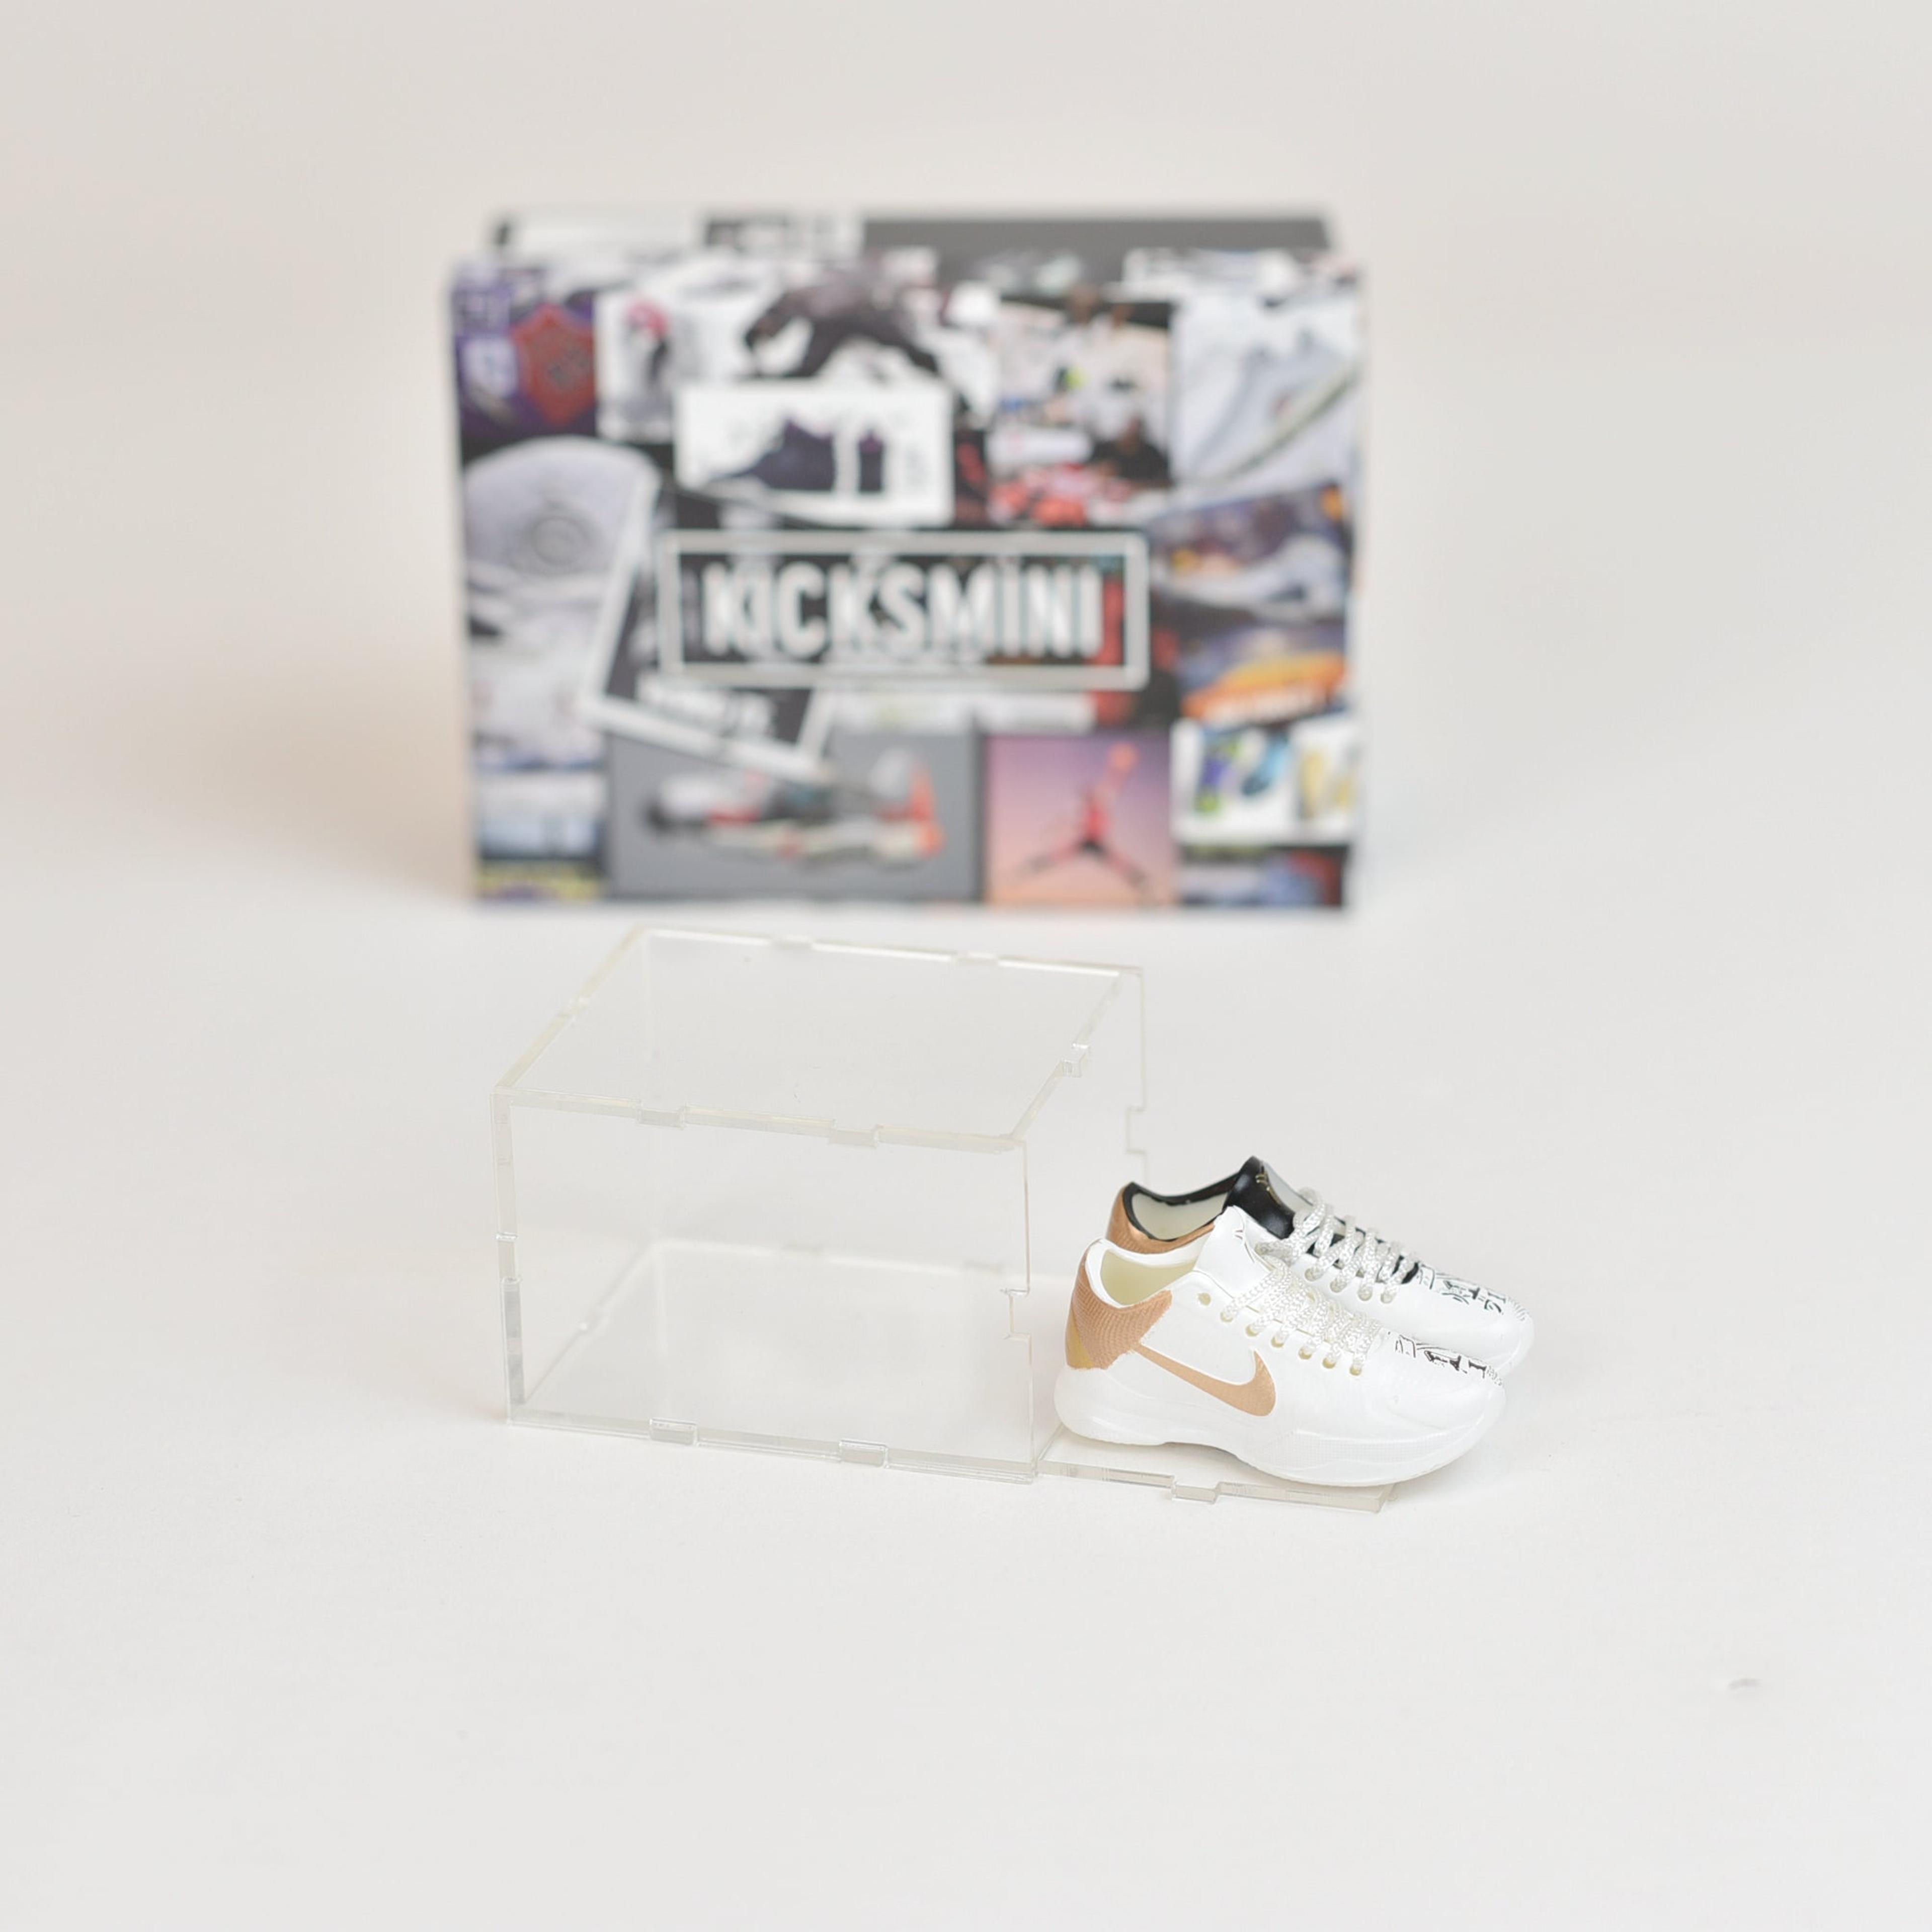 Alternate View 6 of Kobe Bryant/LeBron James/Steph Curry Mini Sneaker Collection wit